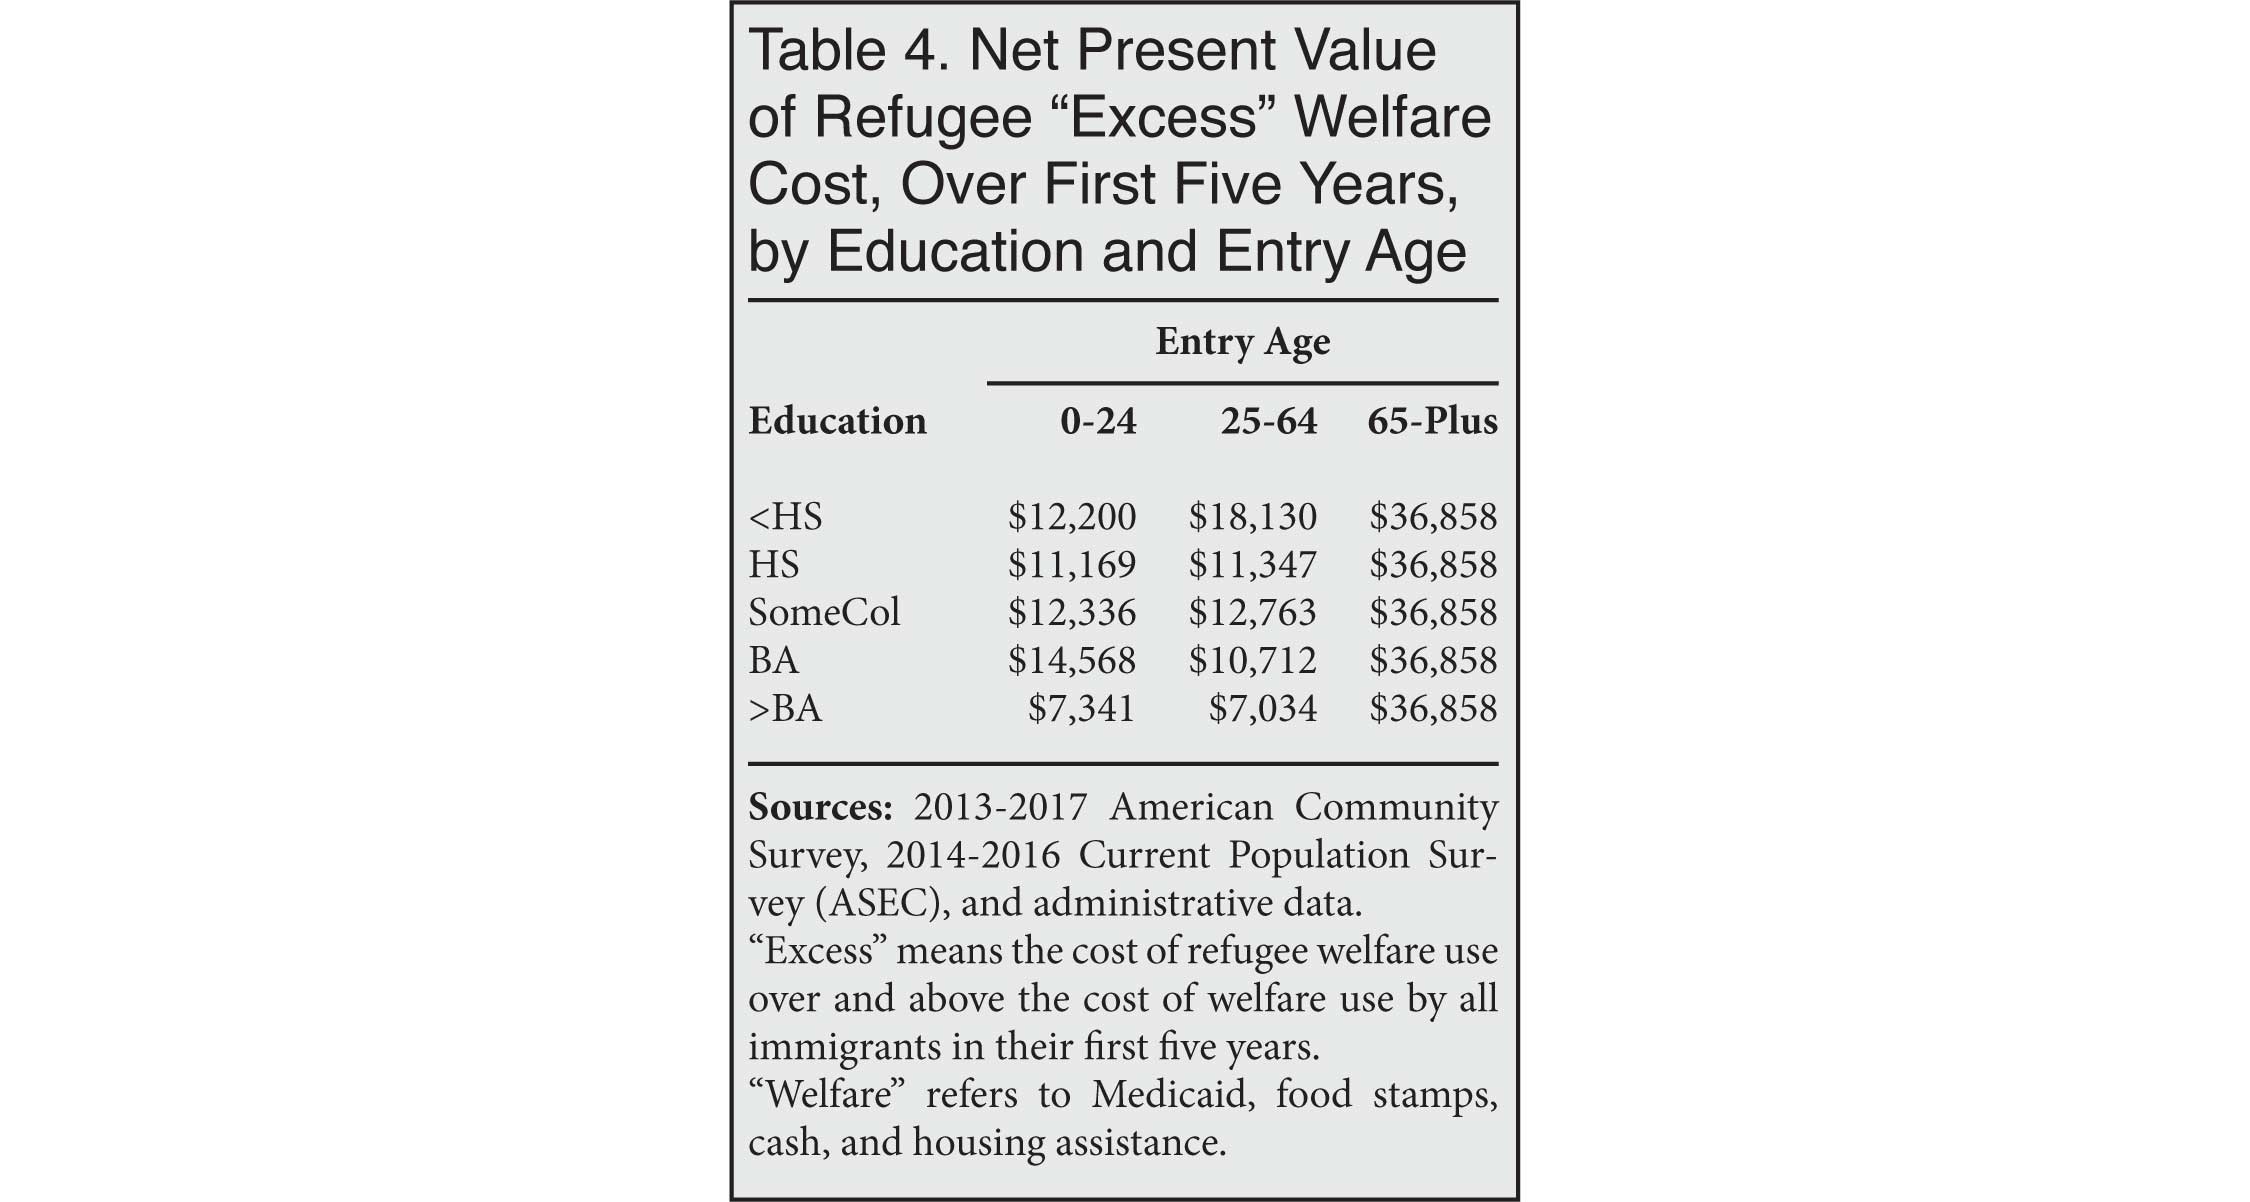 Table: Net present value of refugee "excess" welfare cost